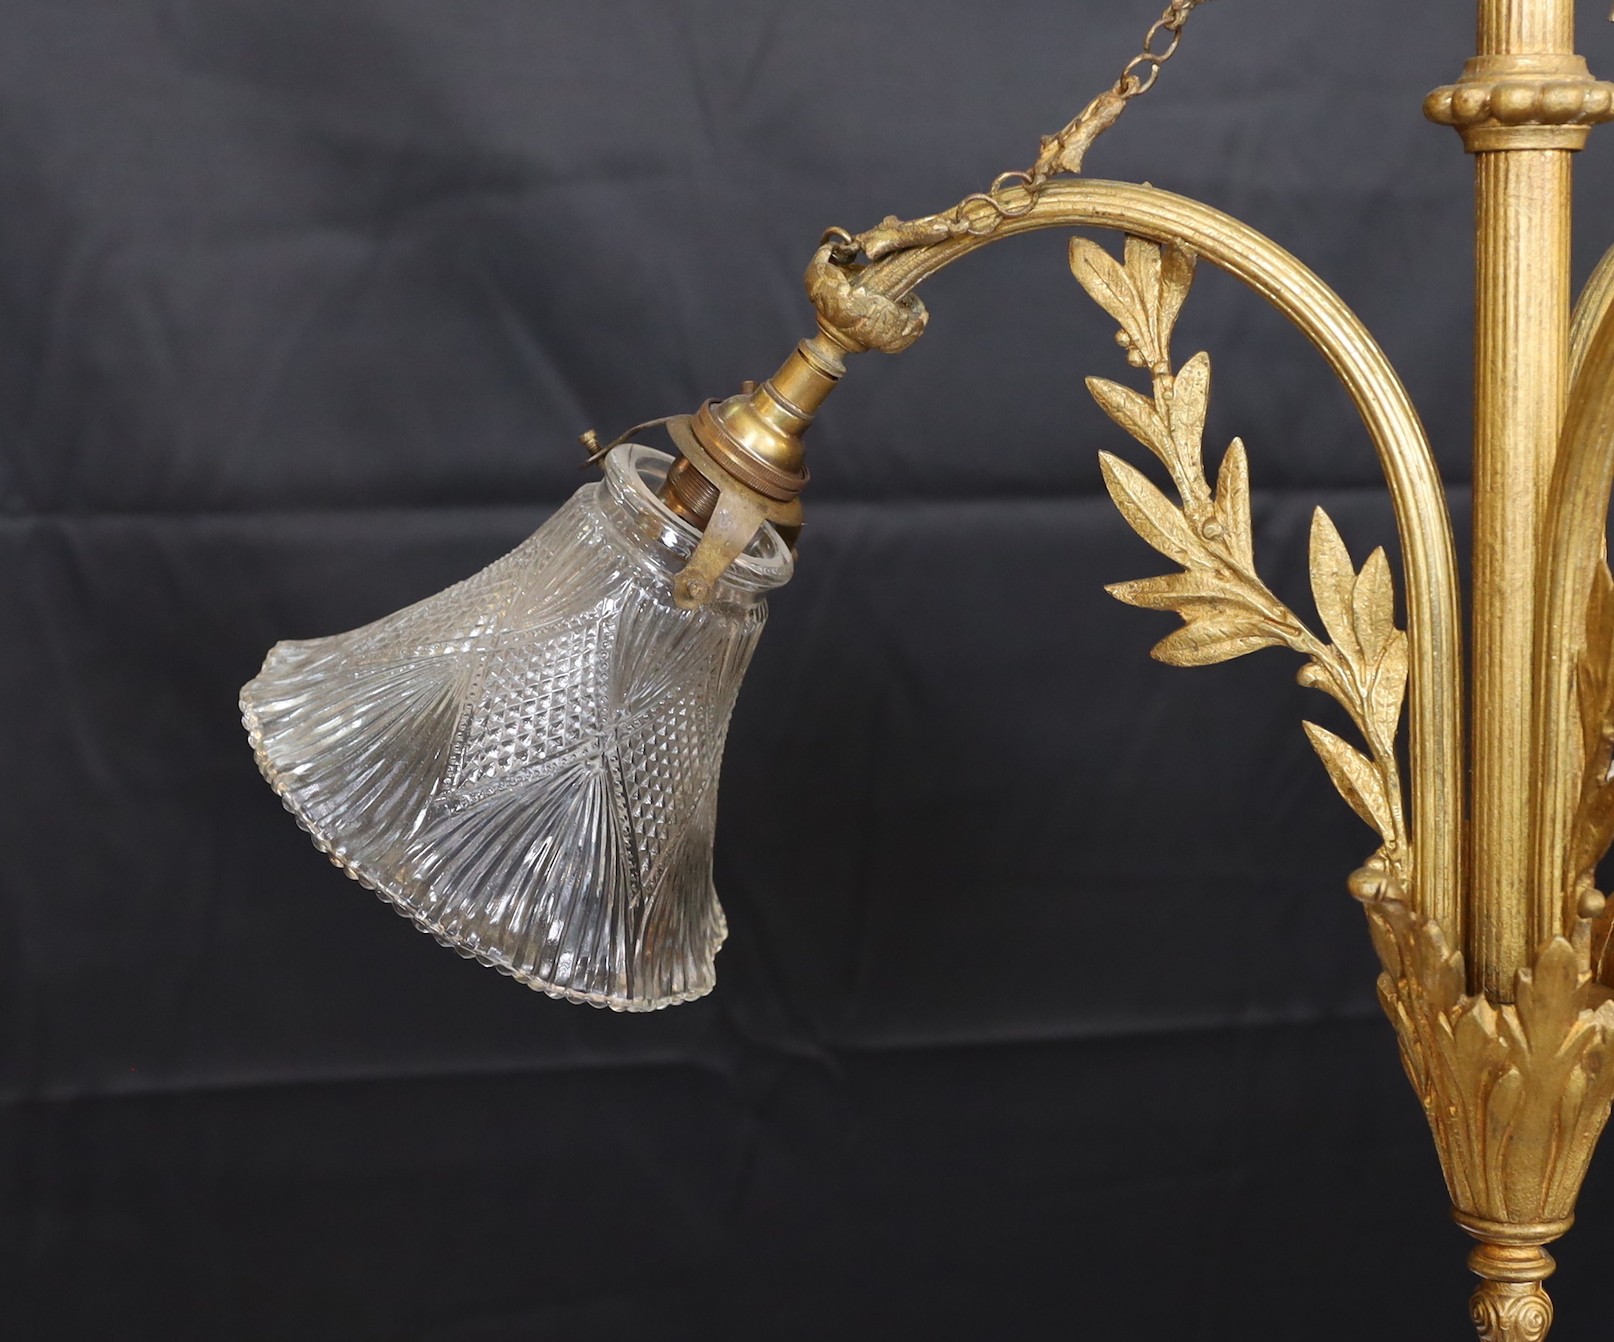 A 20th century French gilt brass three light chandelier with cut glass shades, height 60cm. width 60cm